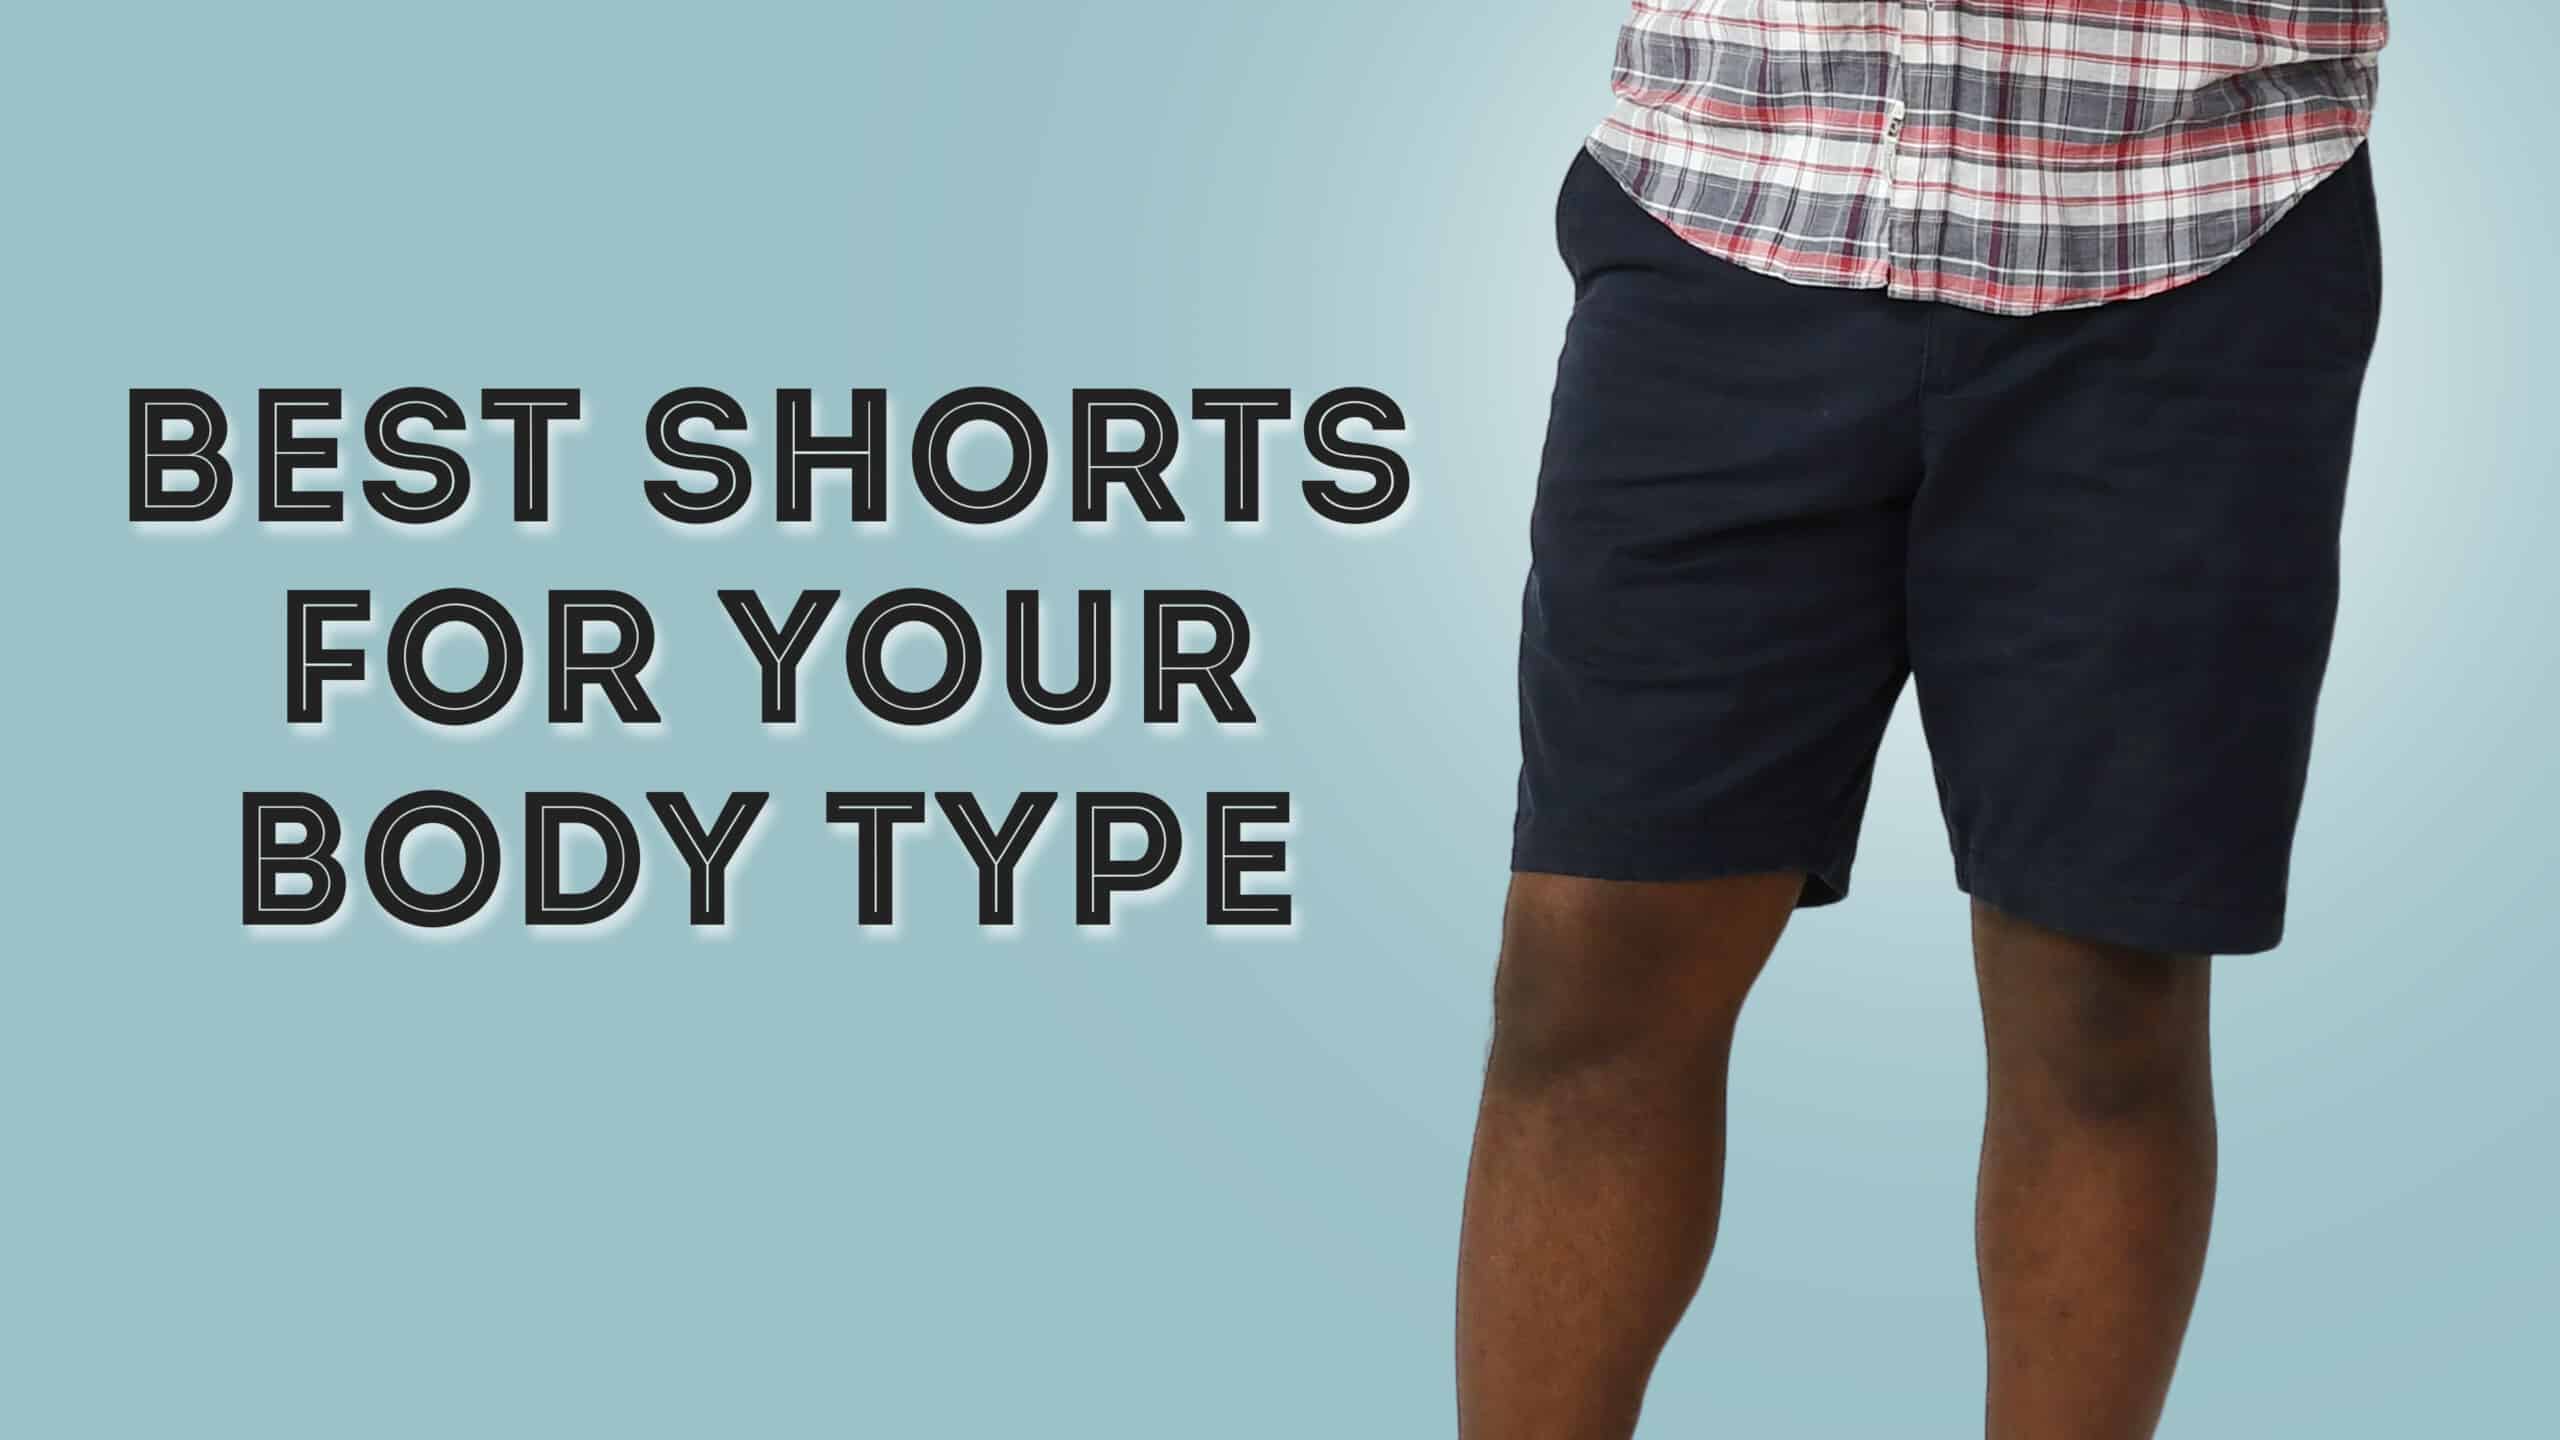 How To Find The Best Shorts For Your Style & Body Type | Gentleman's Gazette